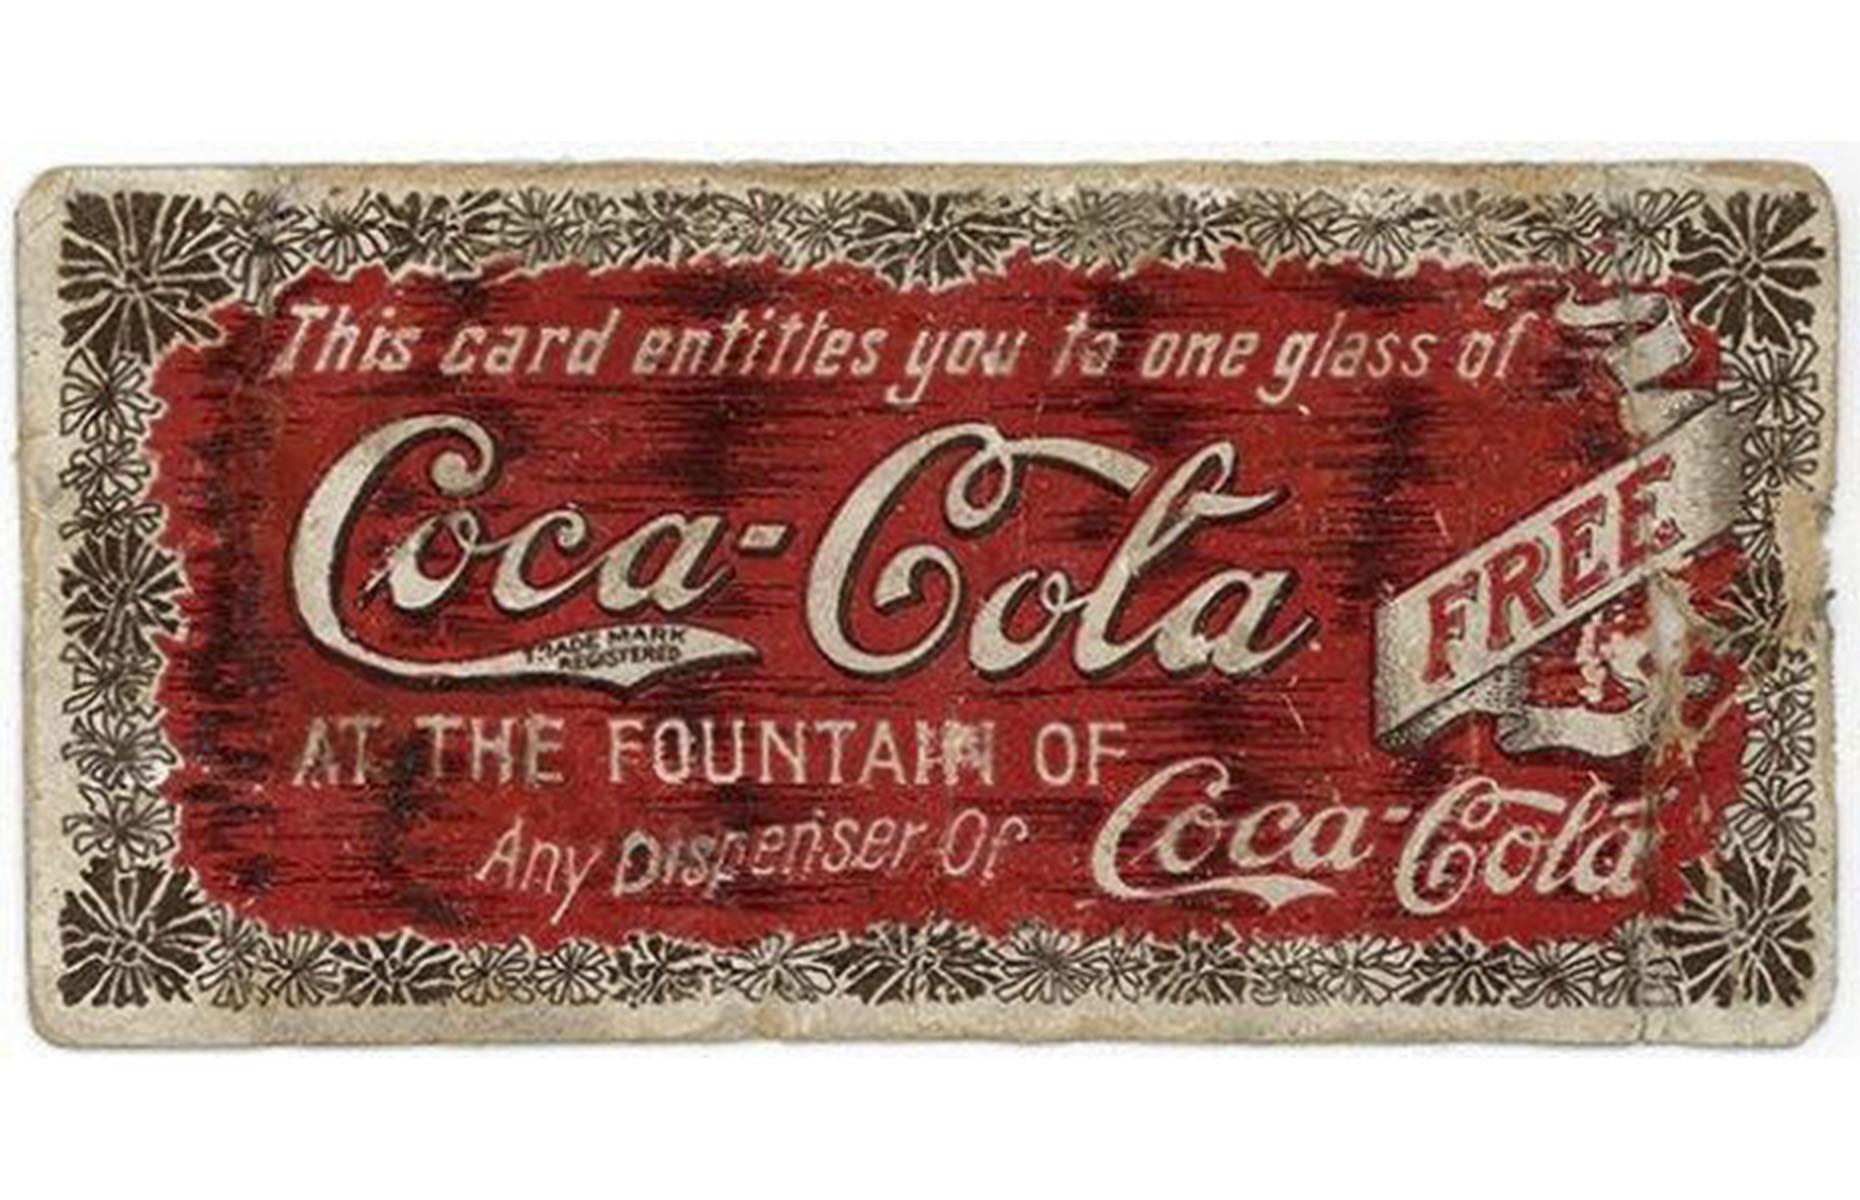 One of John Pemberton’s earliest marketing efforts was to gift coupons for free samples of Coca-Cola to the Atlantic elite. When Candler took over, sampling was taken up a notch and by the 1890s, Coca-Cola was handing out ‘complimentary tickets’ (pictured) to redeem at soda fountains. Between 1886 and 1913, one in nine Americans received a free sample of Coca-Cola.